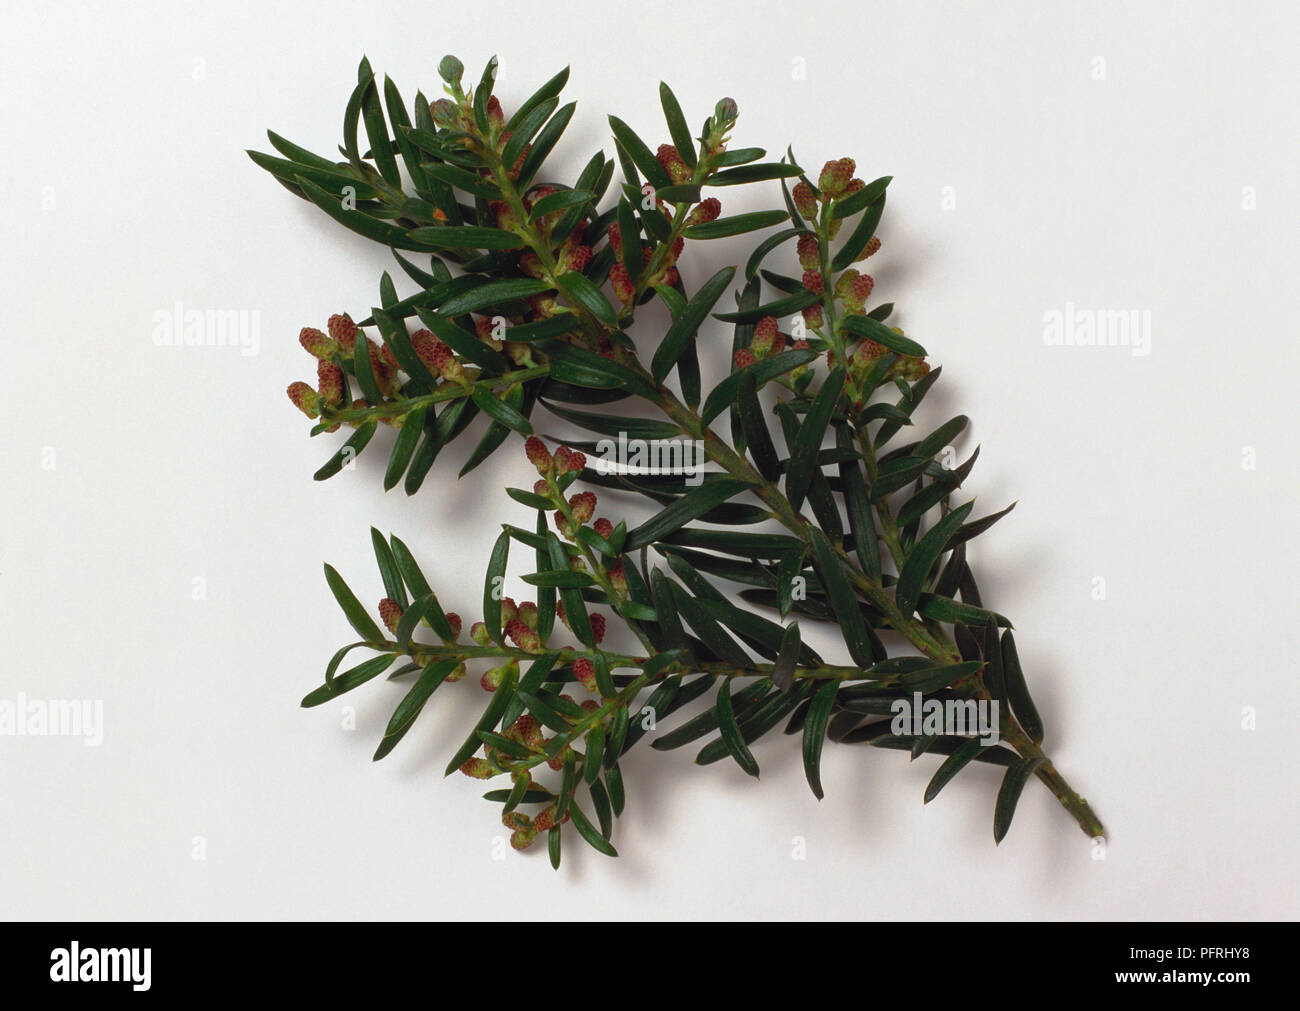 Saxegothaea conspicua (Prince Alberts yew), stem with green leaves Stock Photo